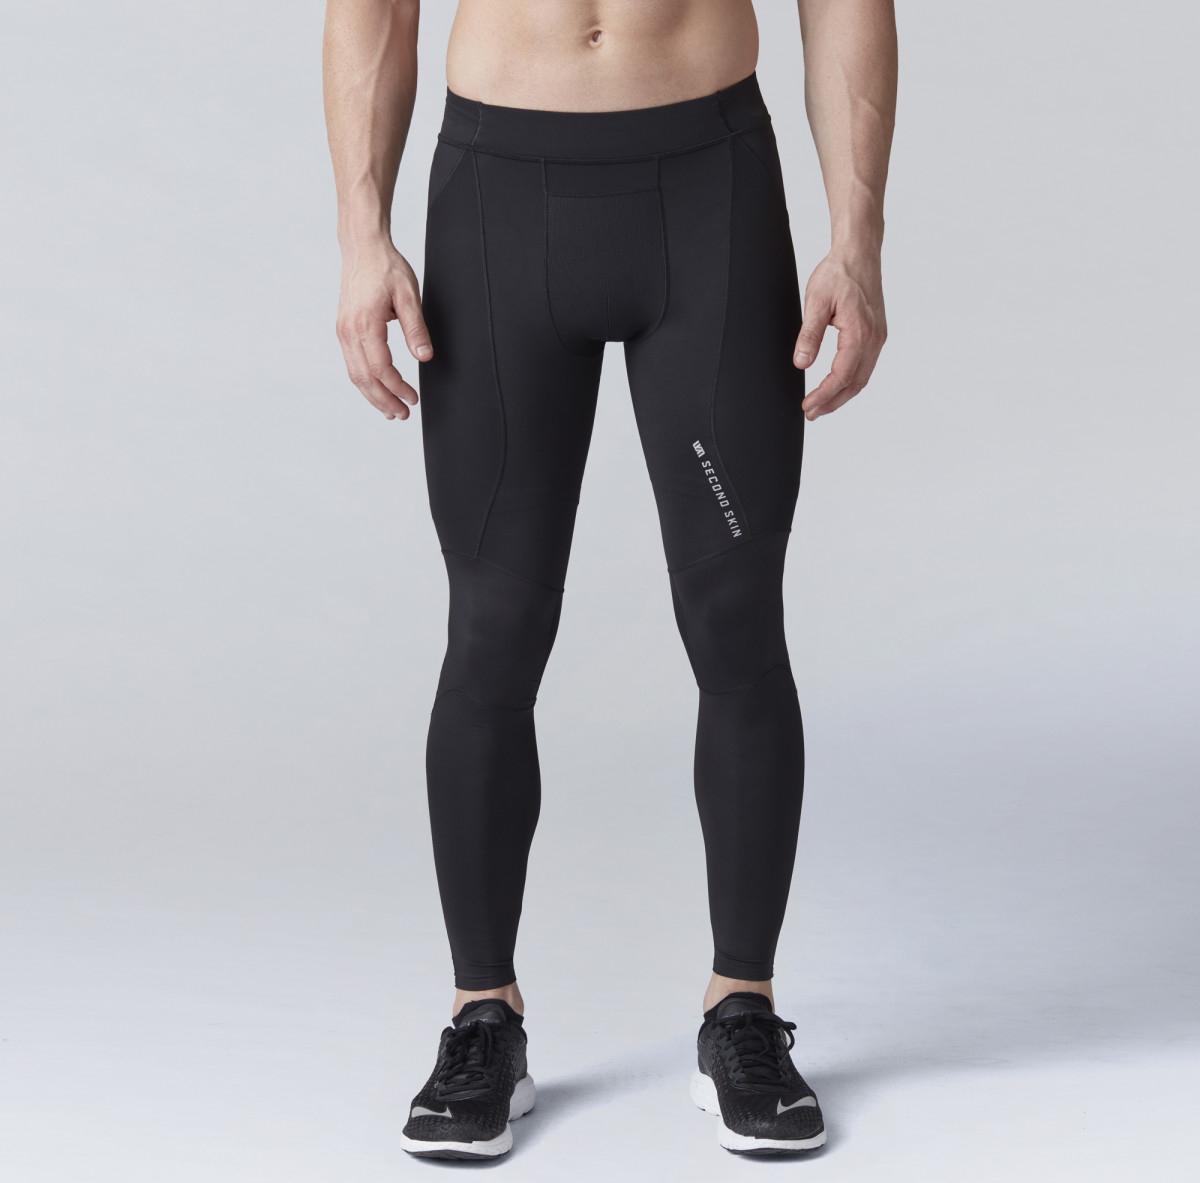 It's Time You Got a Pair of Gym Tights - Men's Journal